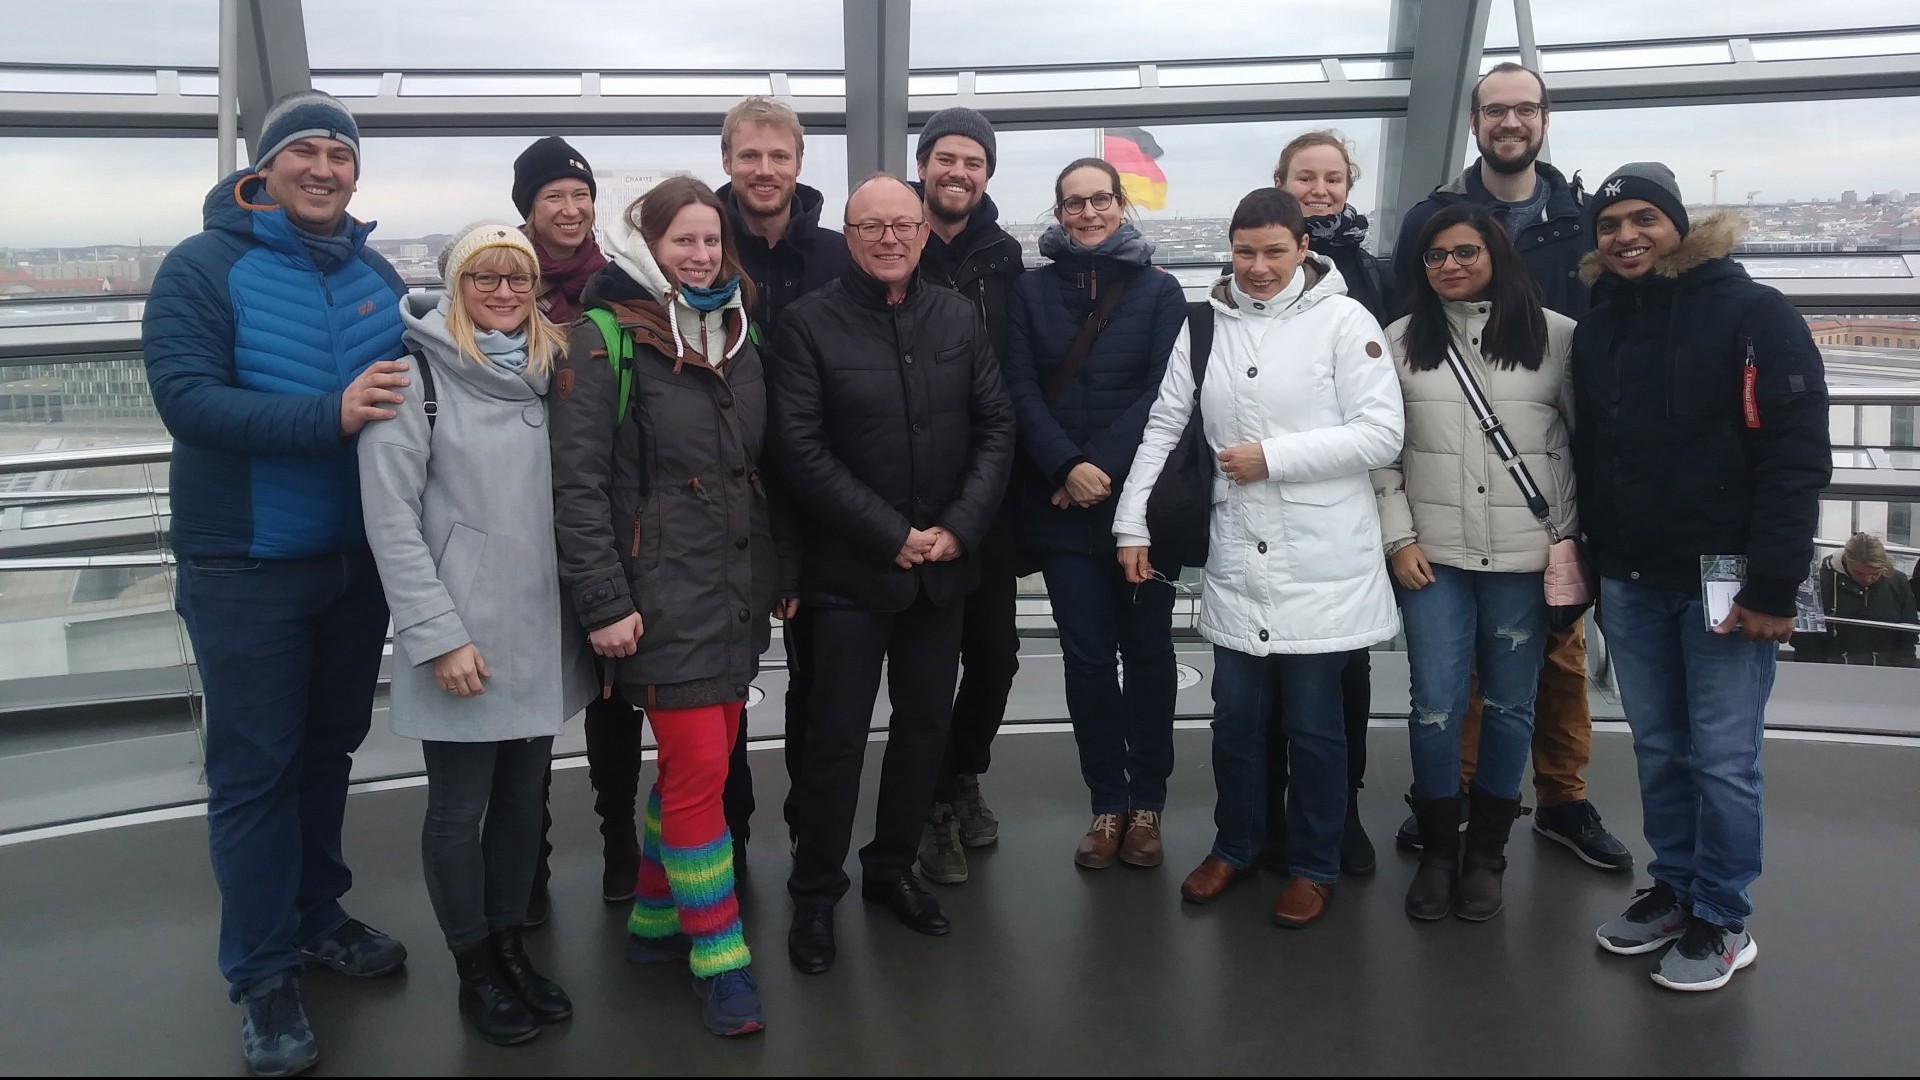 The group of visitors of the Bremen Max Planck Institute for Marine Microbiology in the dome of the Berlin Reichstag building.